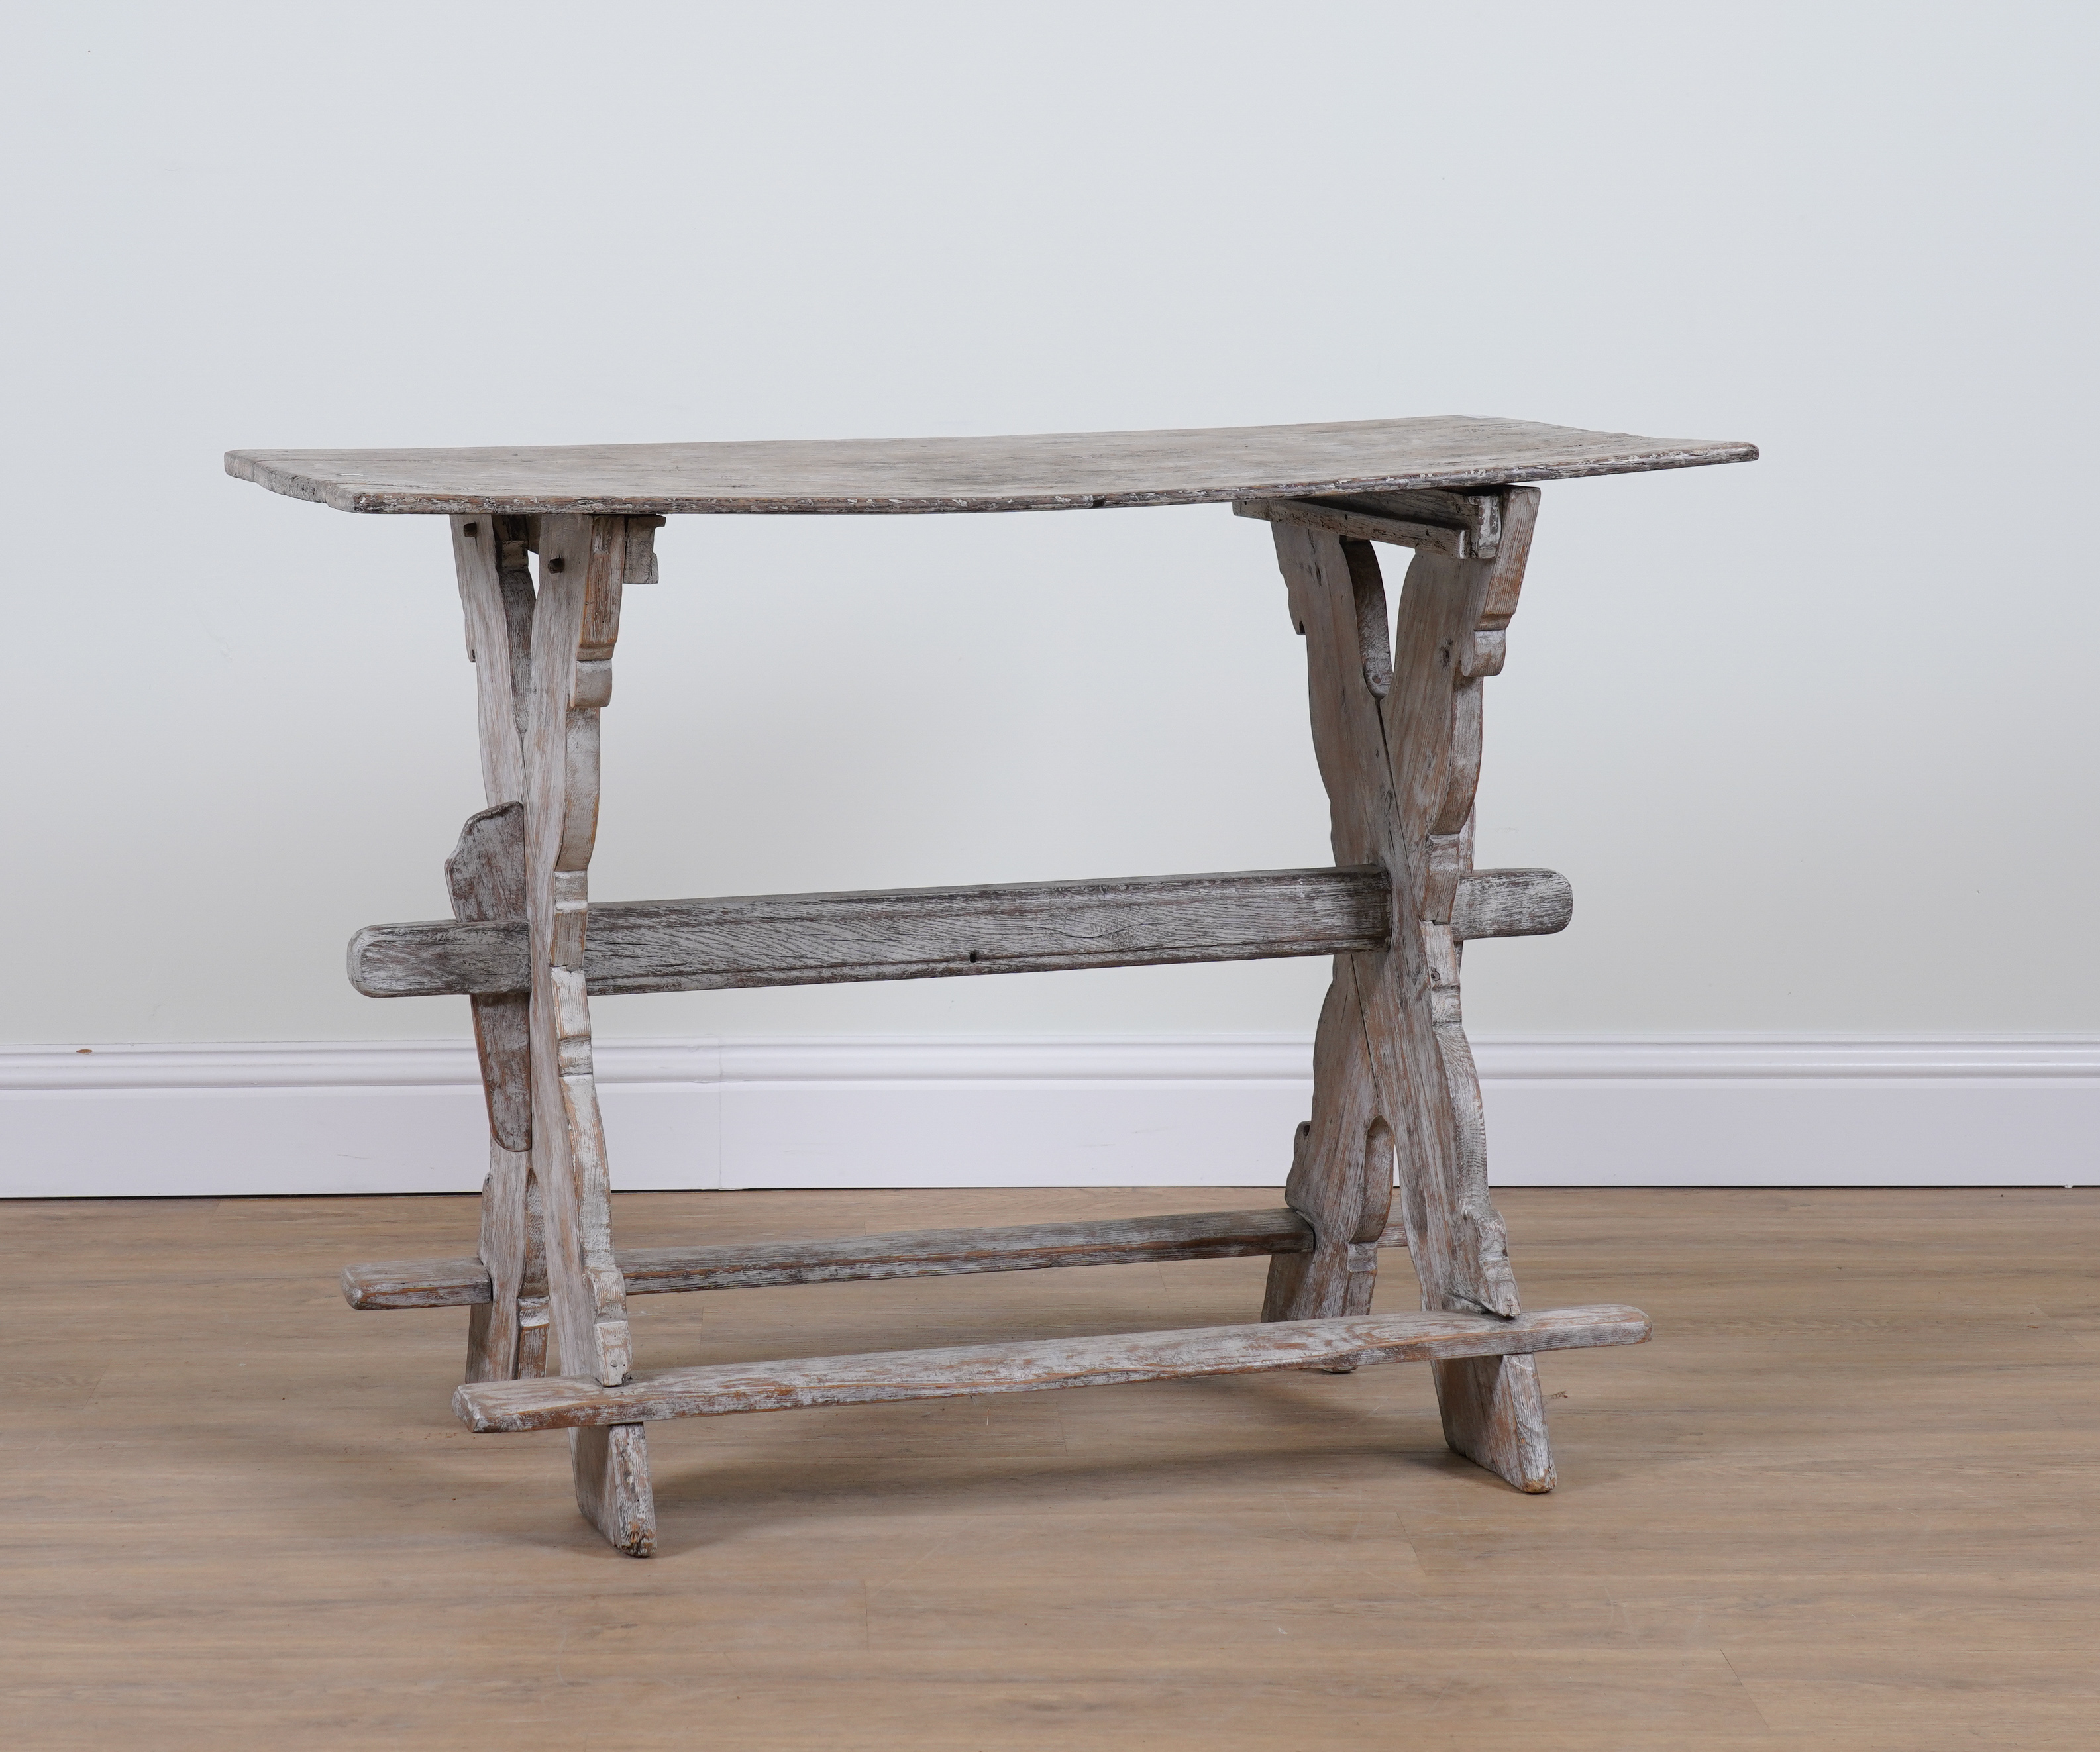 A CONTINENTAL GUSTAVIAN STYLE PAINTED OAK SMALL TAVERN TABLE